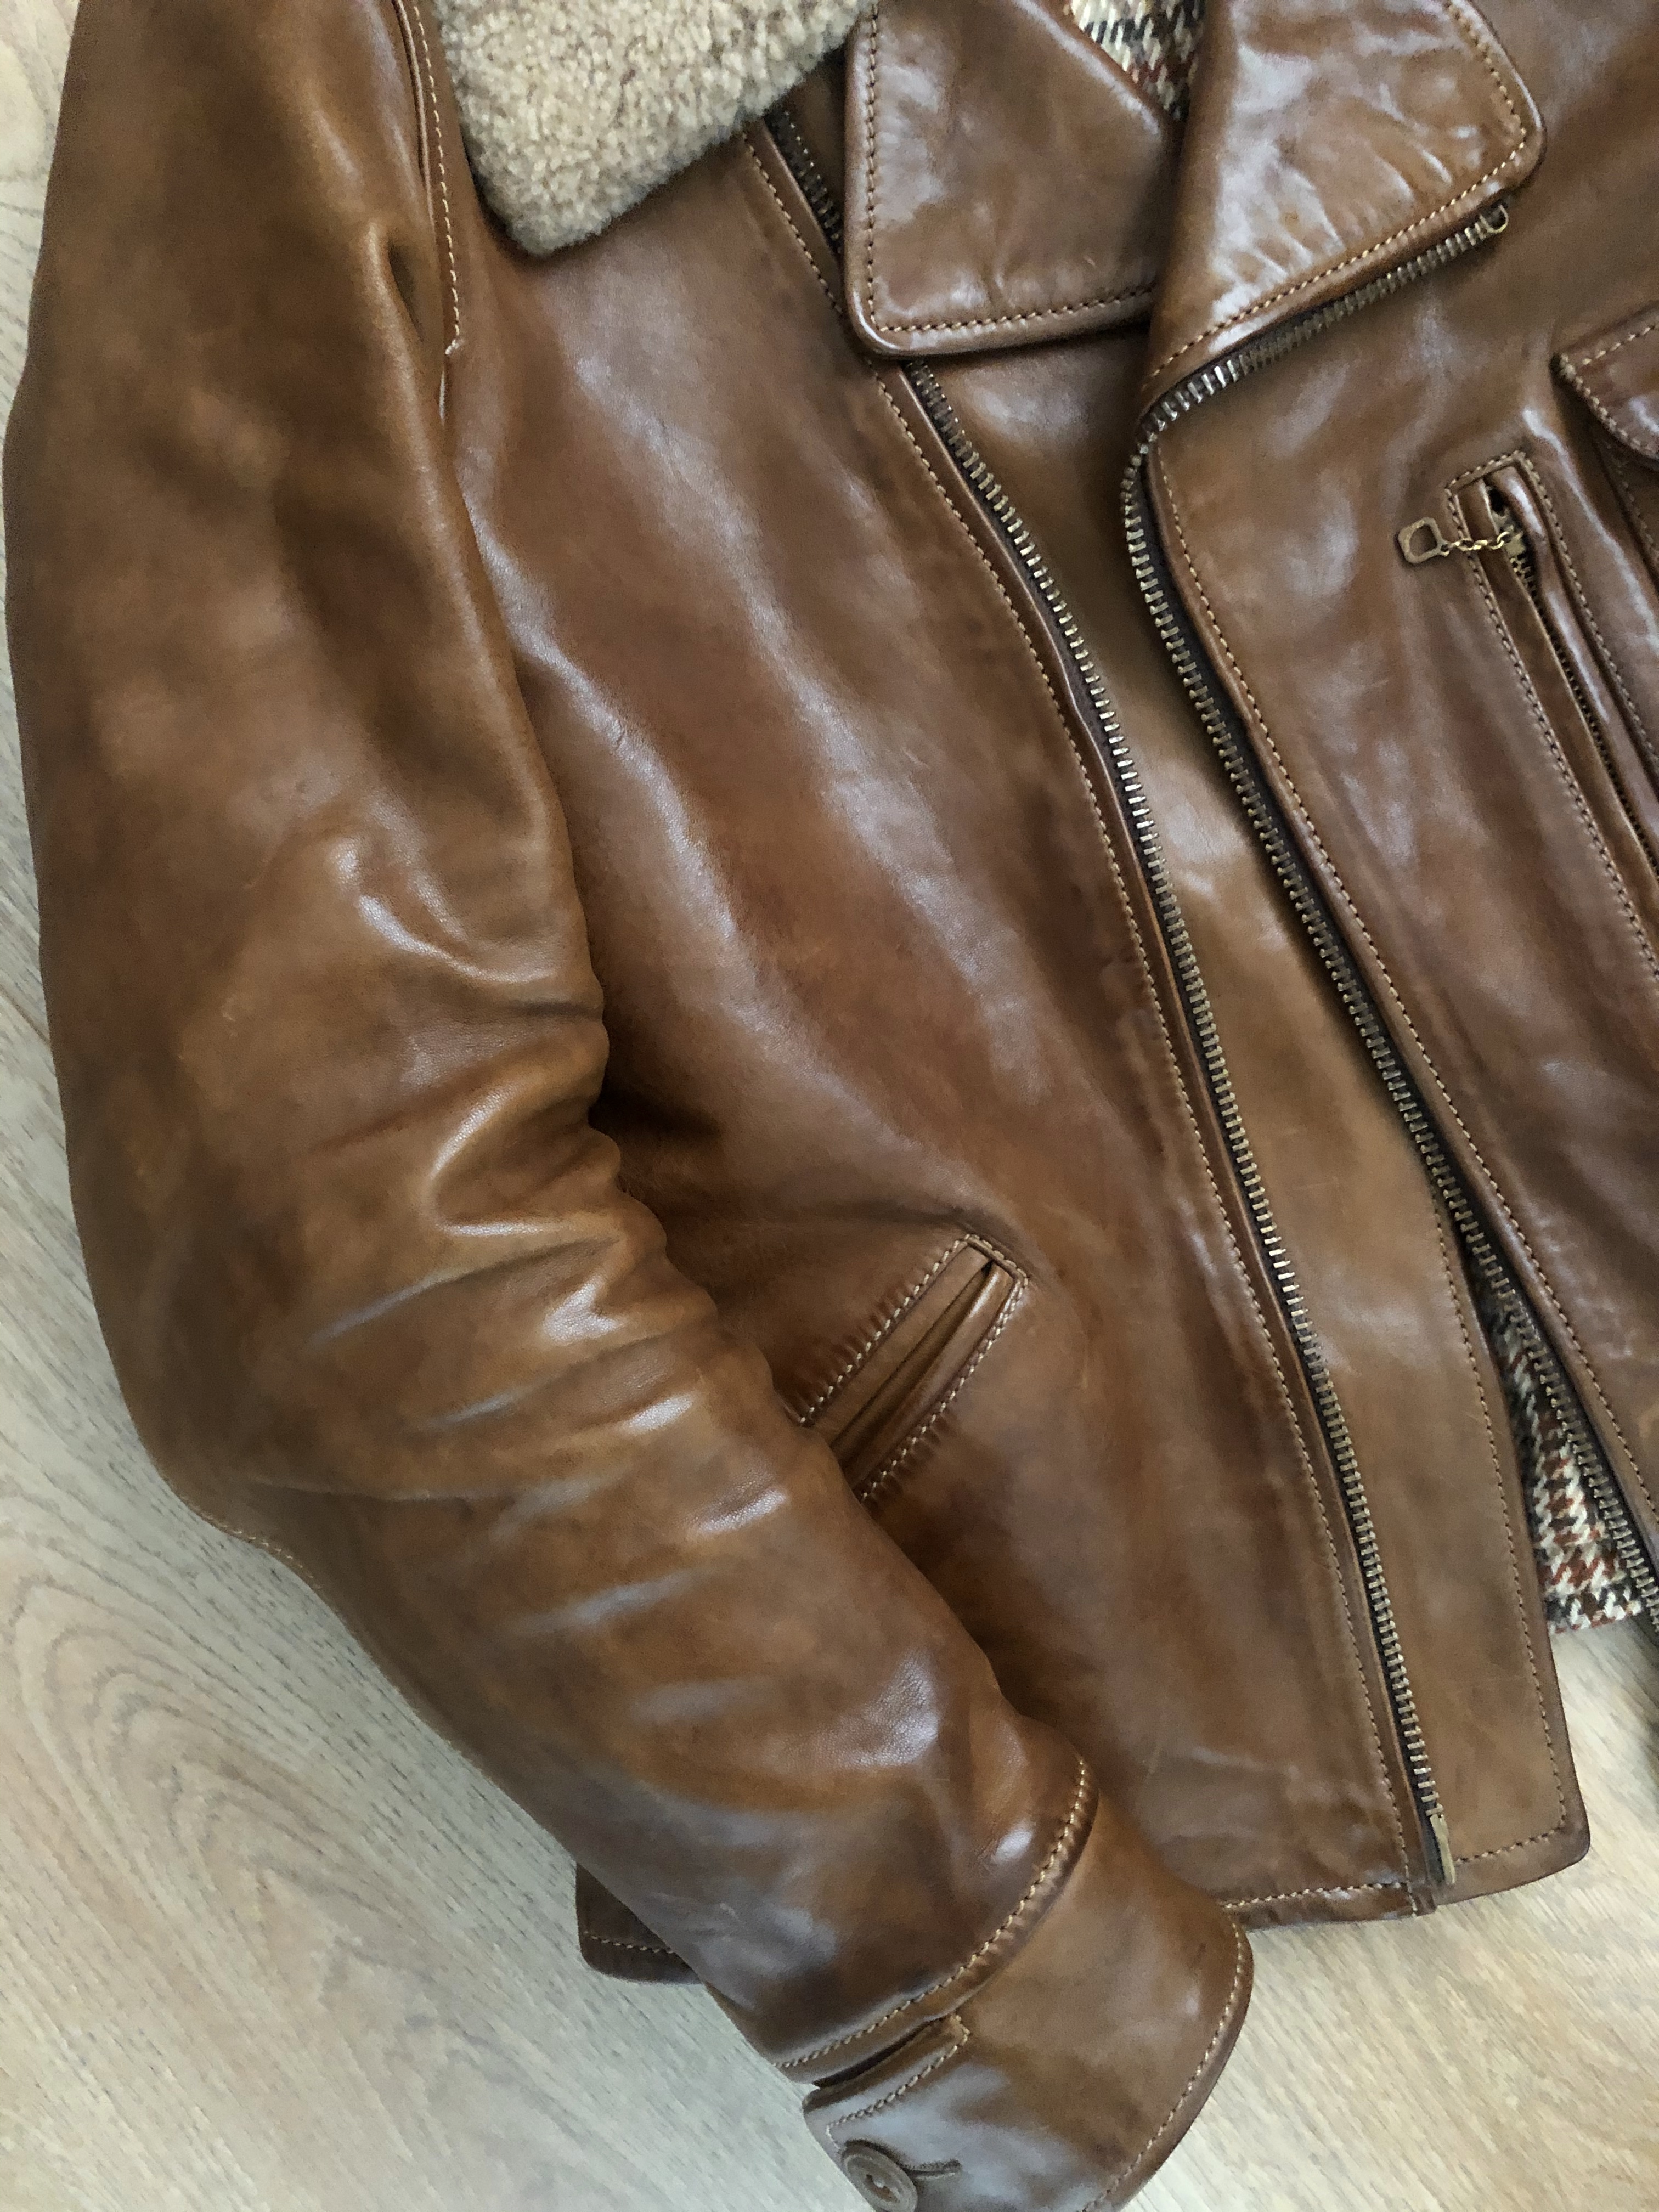 Post Thedi Leather Jacket Photos Here........ | Page 2 | The Fedora Lounge